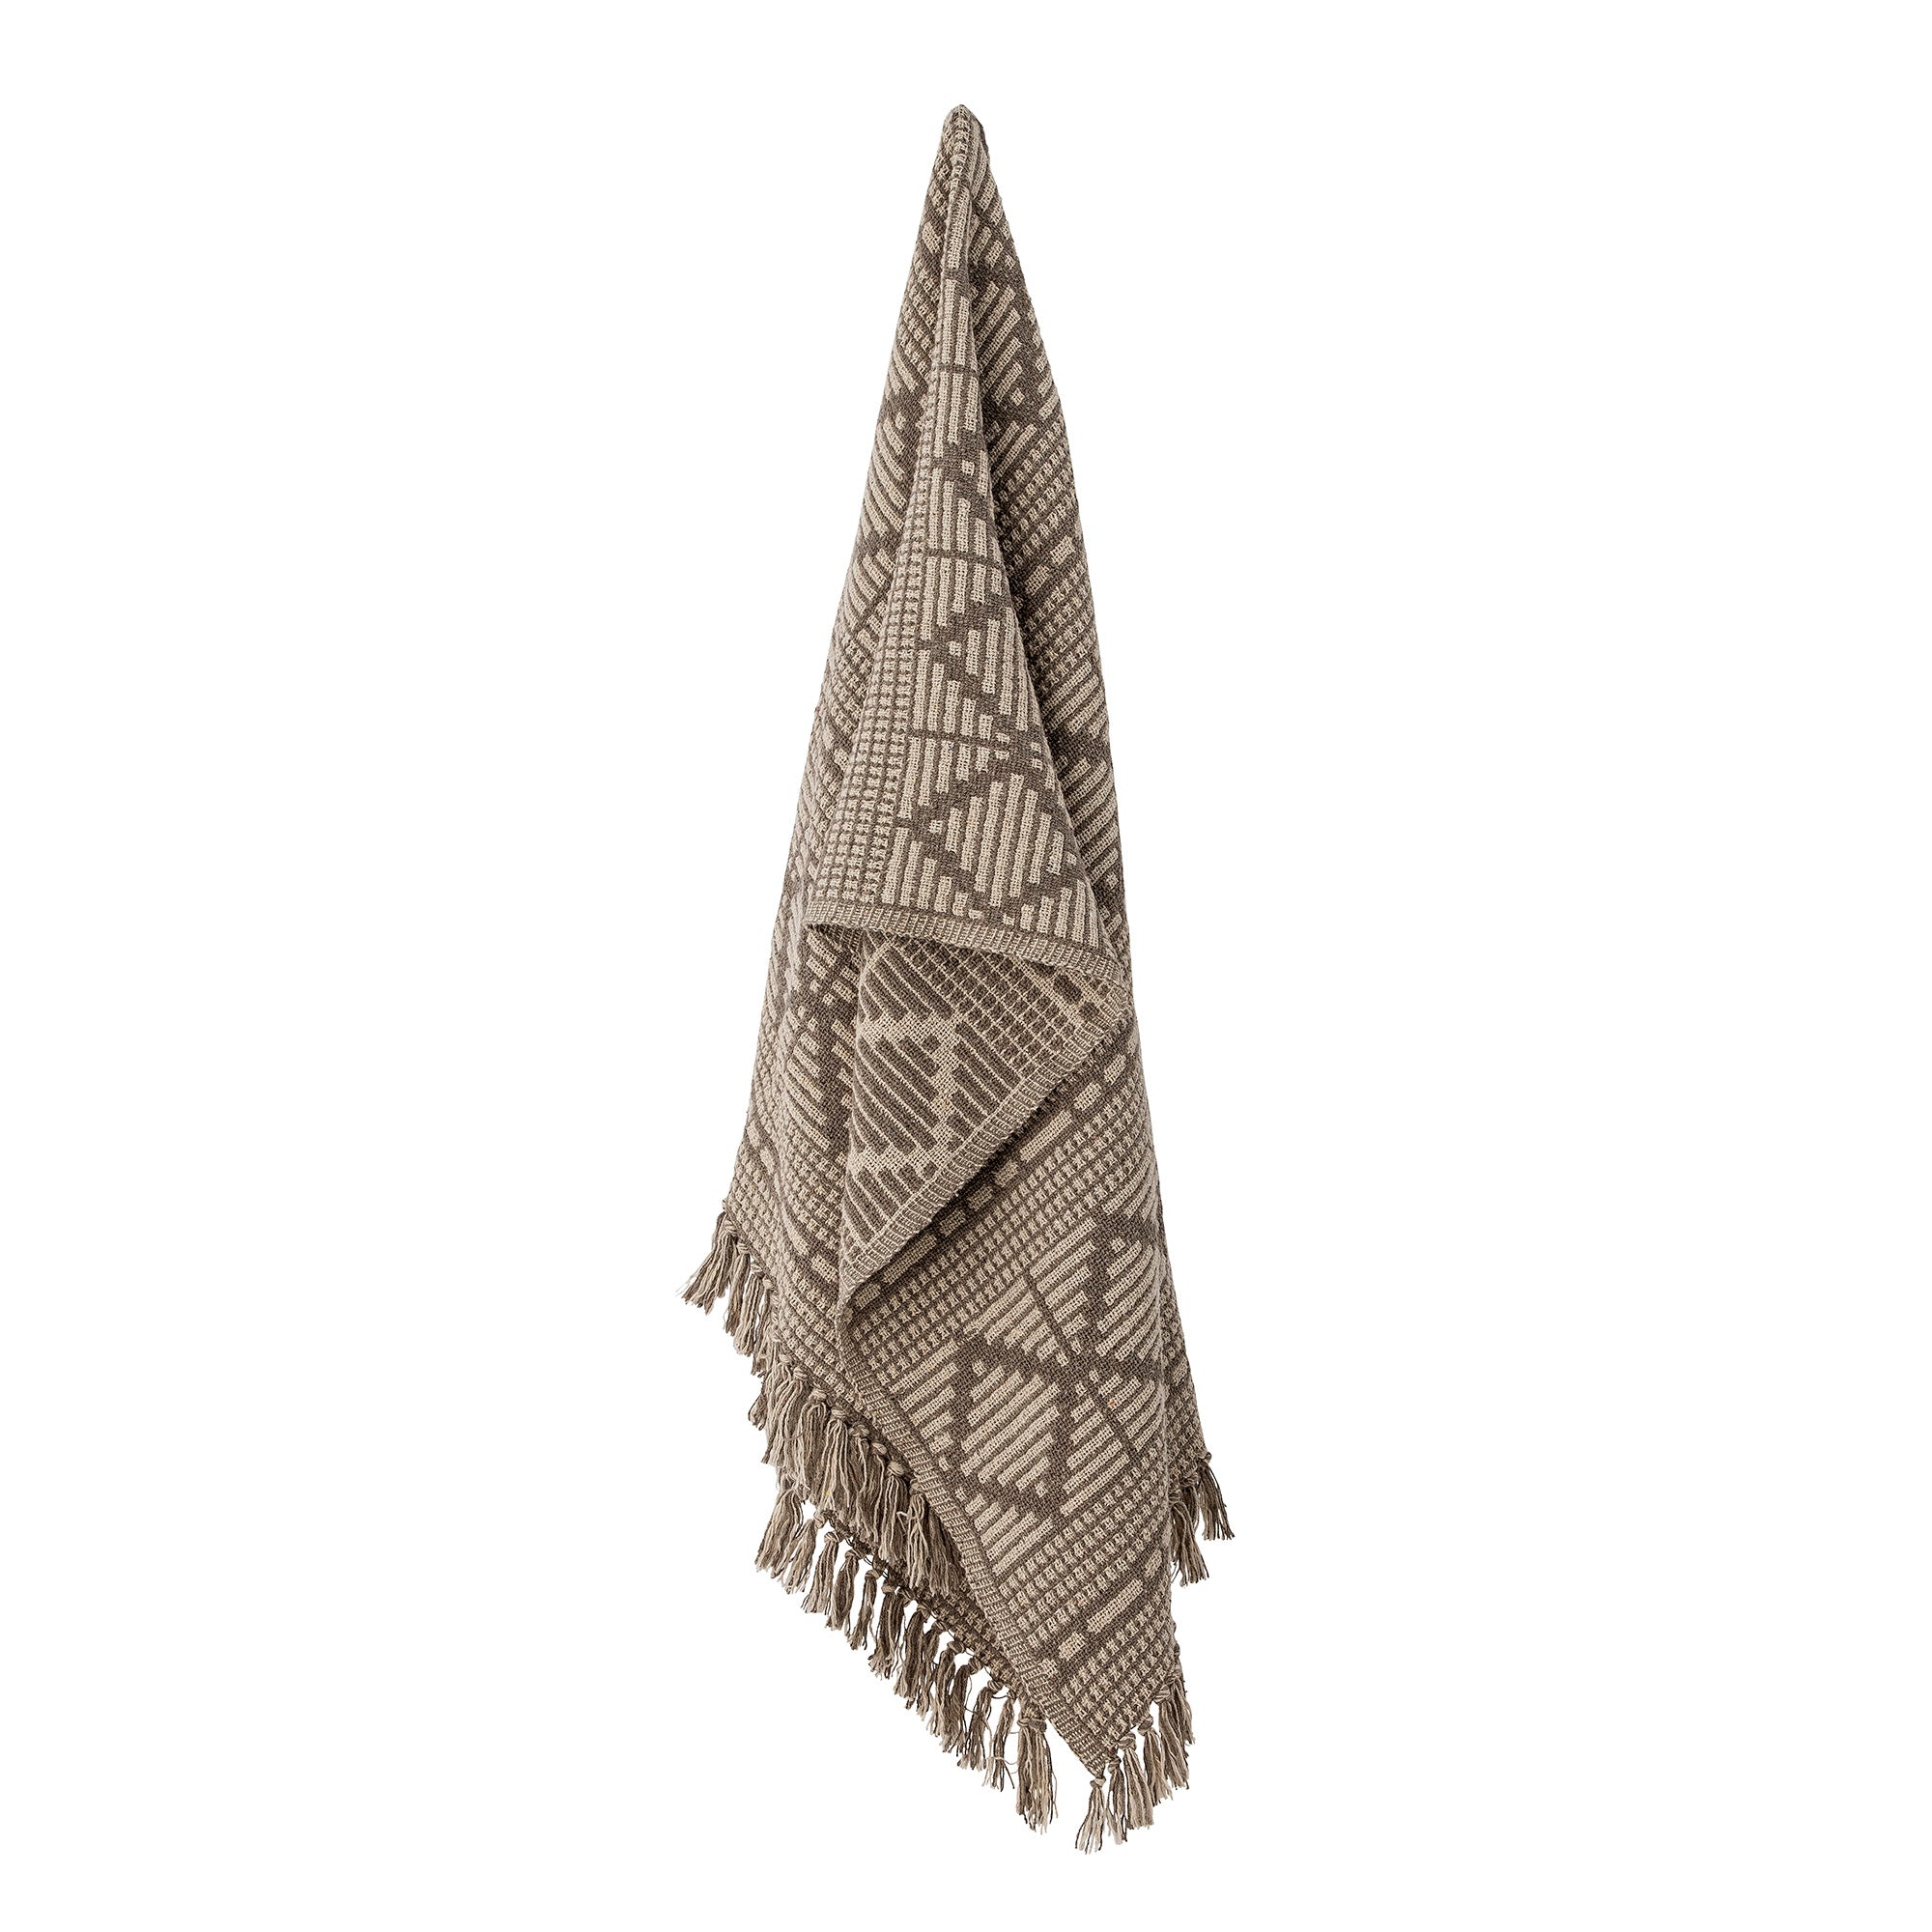 Soft Brown And Cream Patterned Recycled Cotton "Kicki" Throw